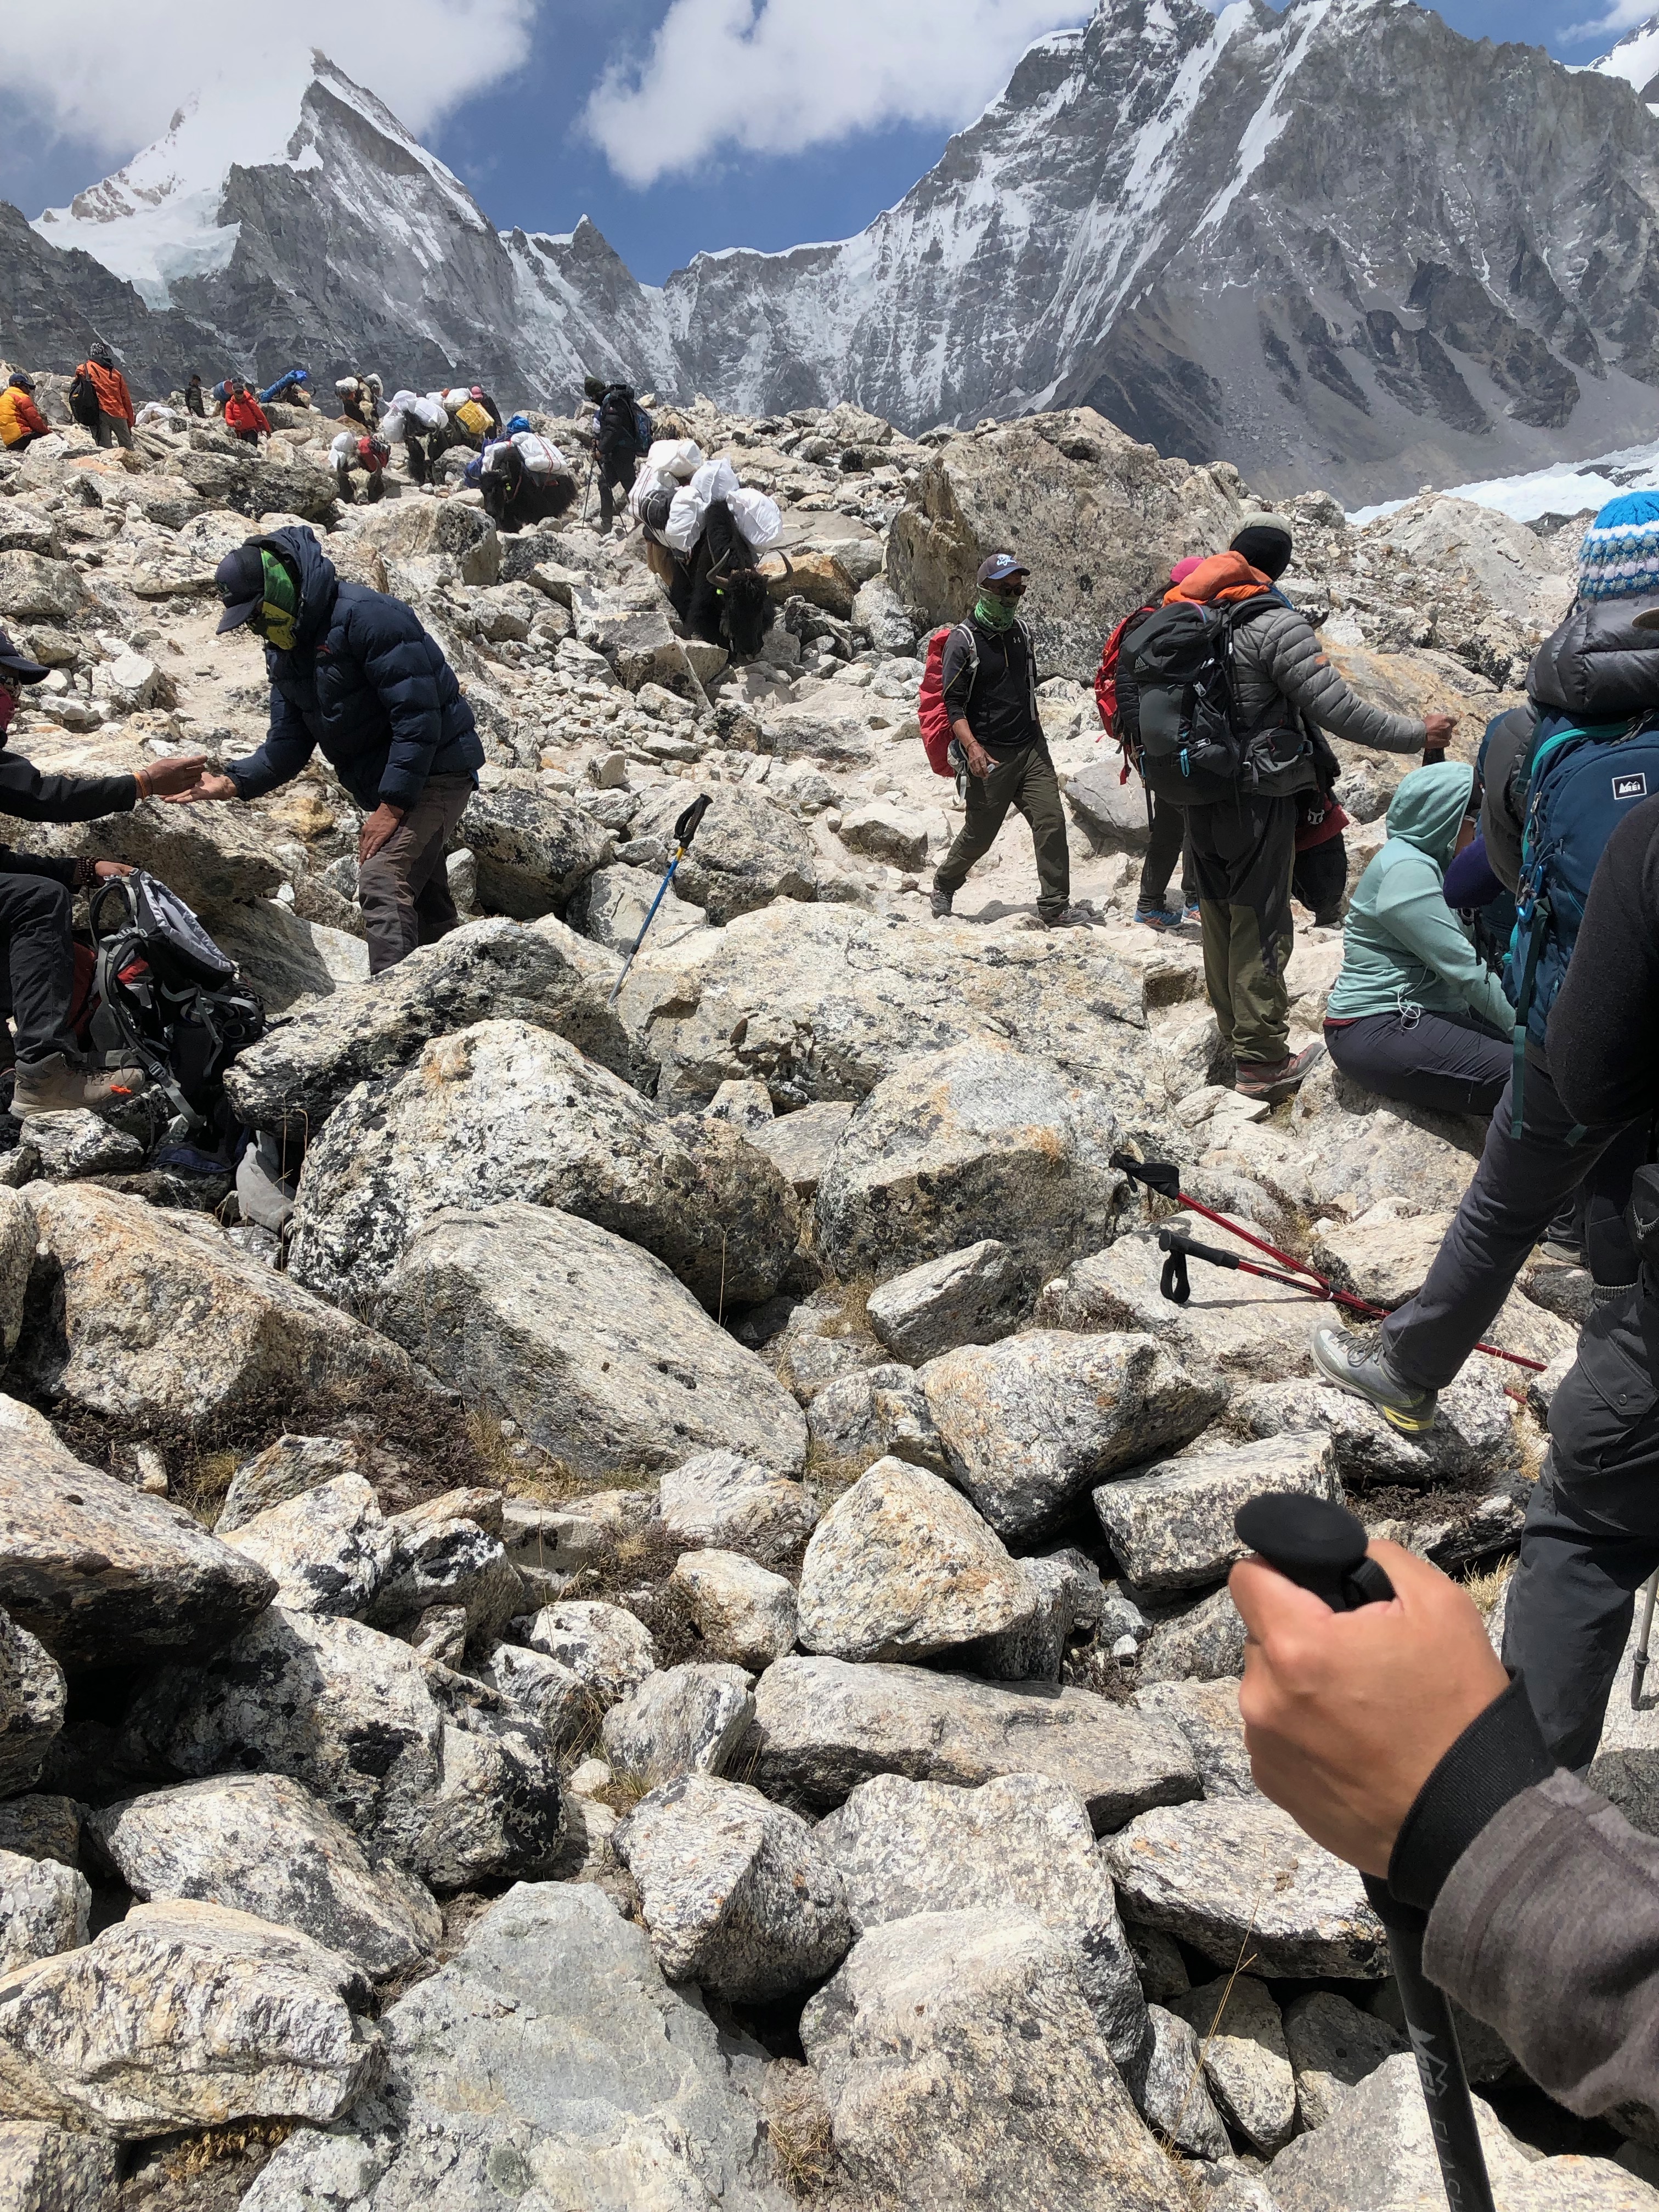 The rocky trail into Everest Base Camp